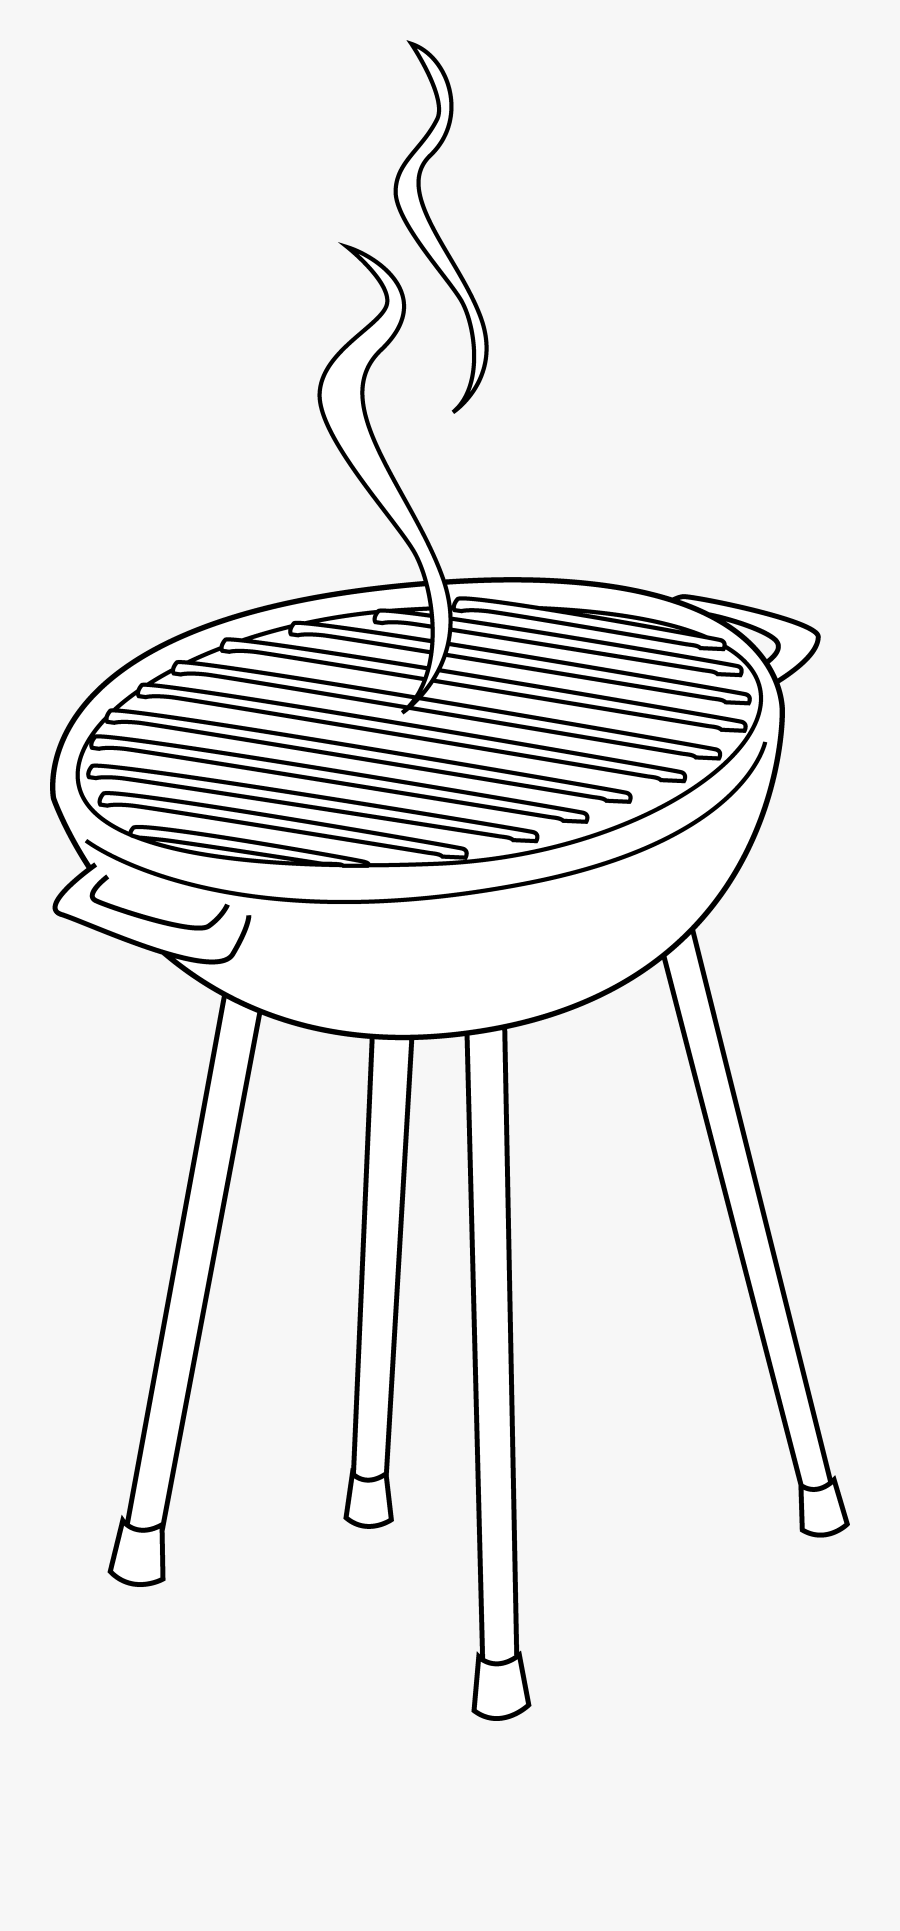 Grill Clipart Black And White - Black And White Clip Art Grill, Transparent Clipart